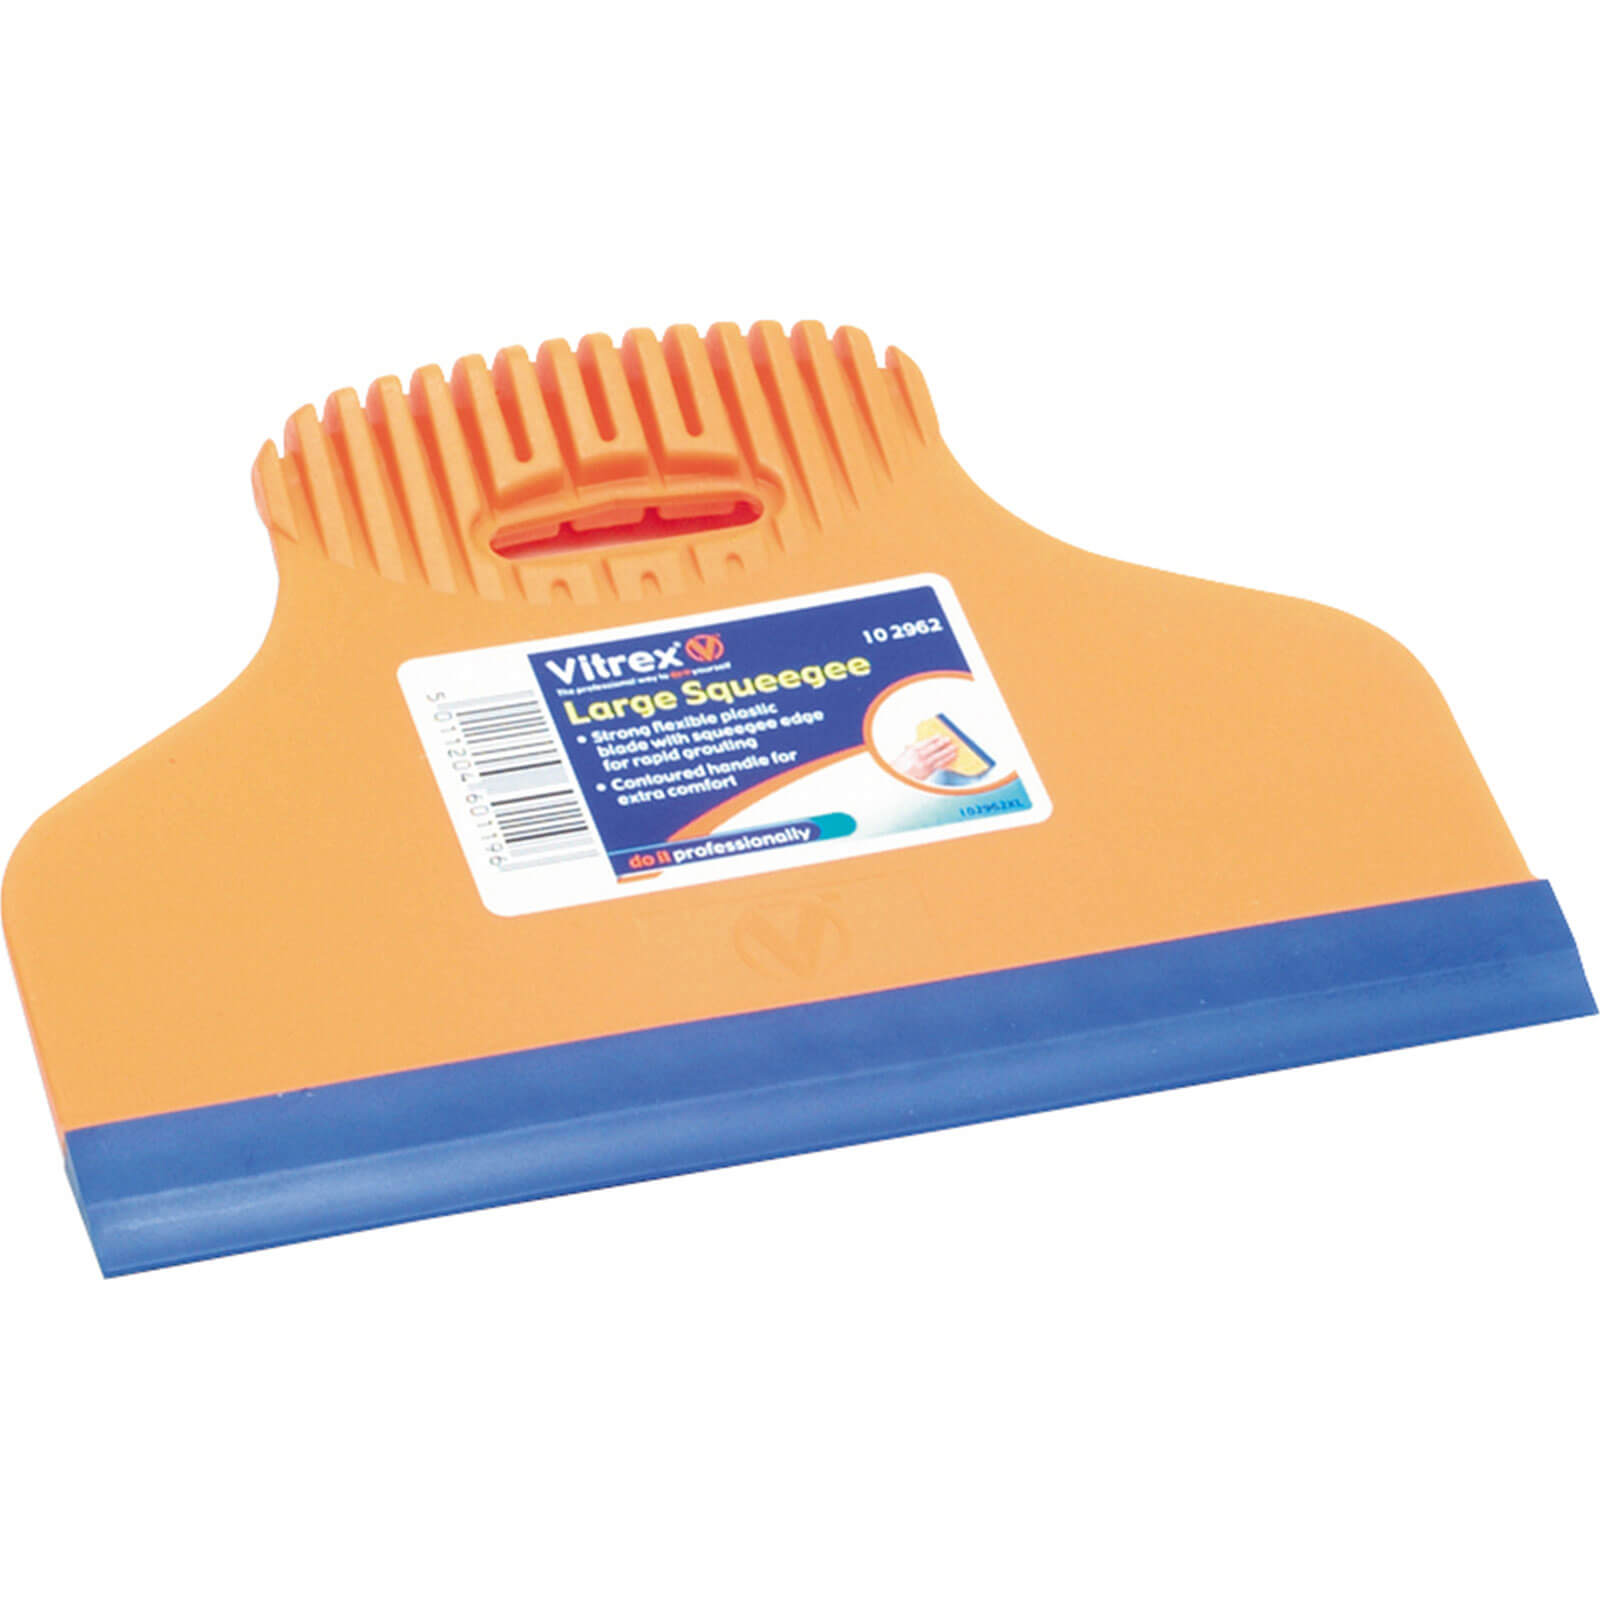 Vitrex 10 2962 Tile Squeegee